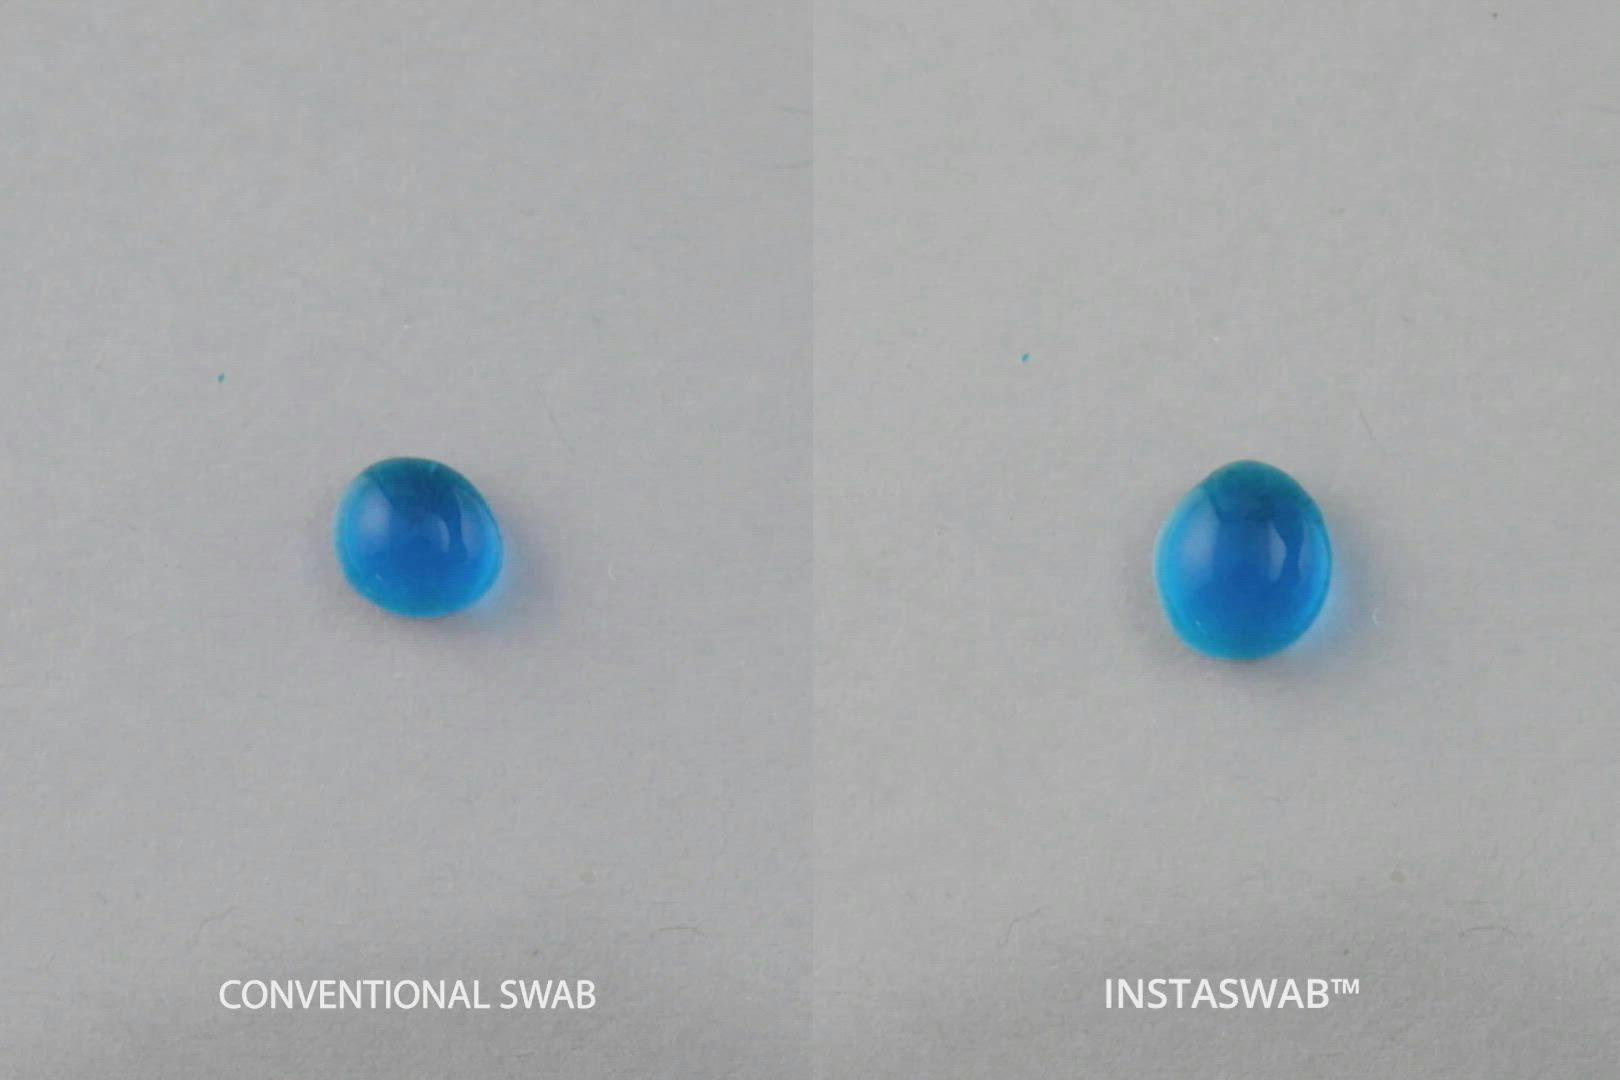 Absorption of test substance by conventional and Instaswab swabs by OPT Industries